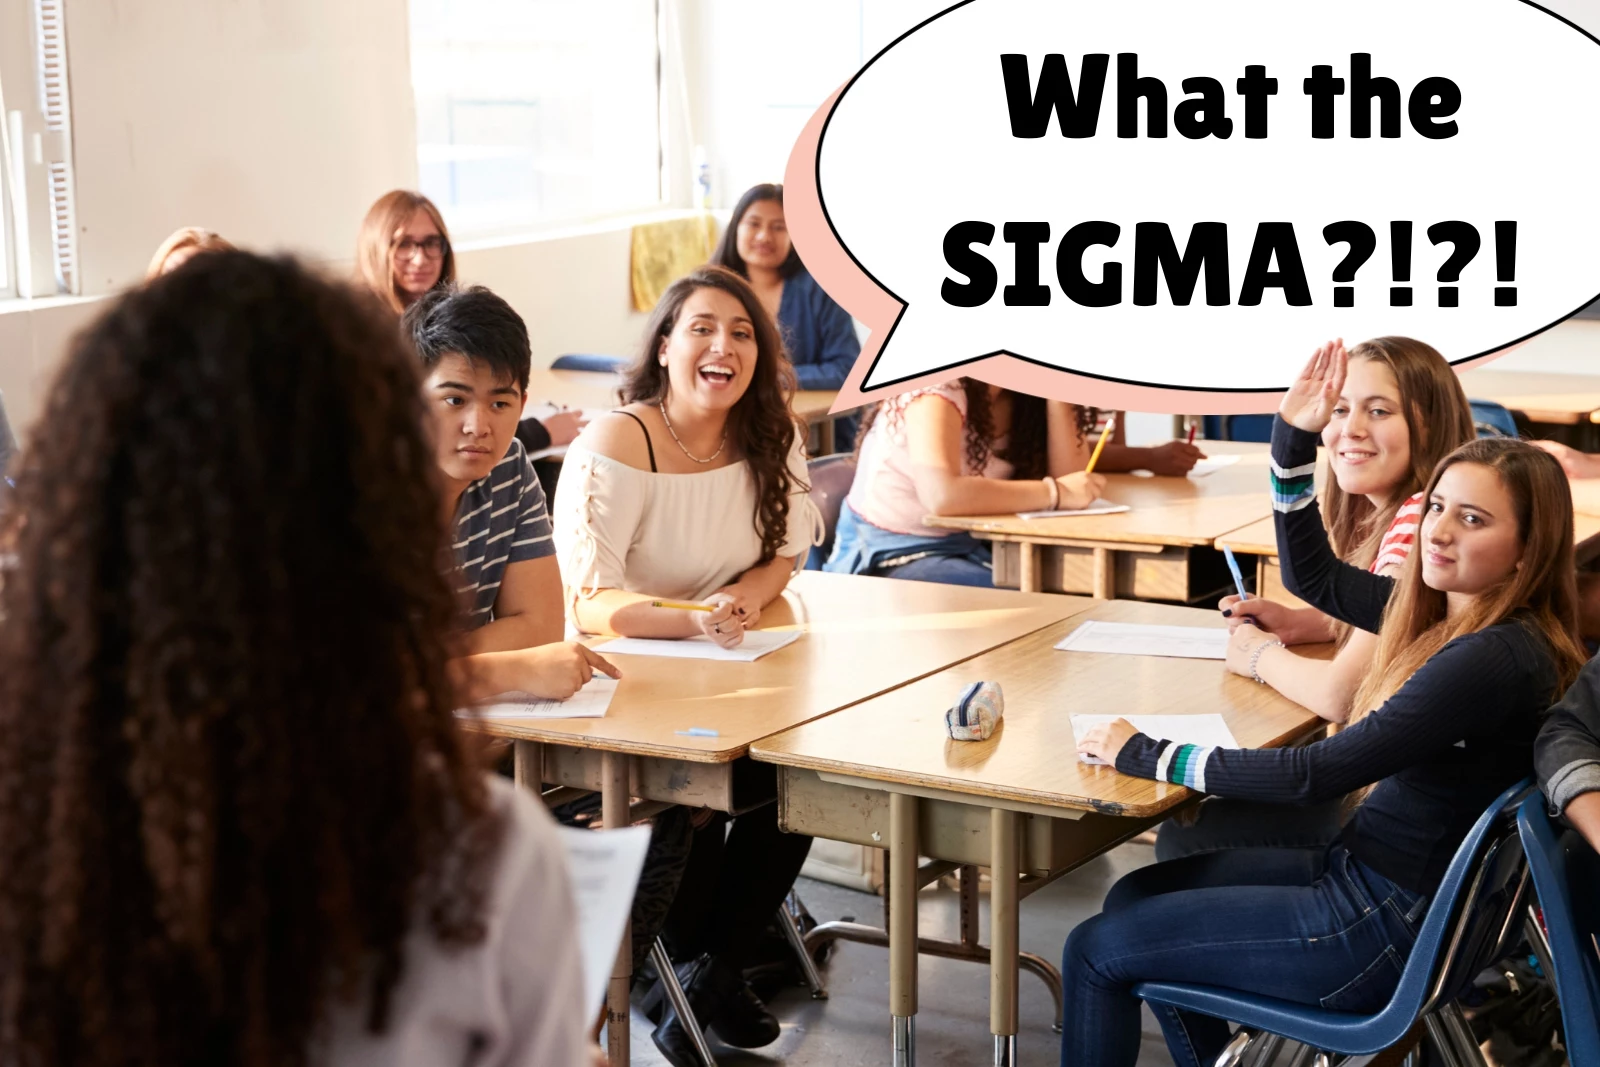 Everything You Need to Know About the 'What The Sigma' Trend